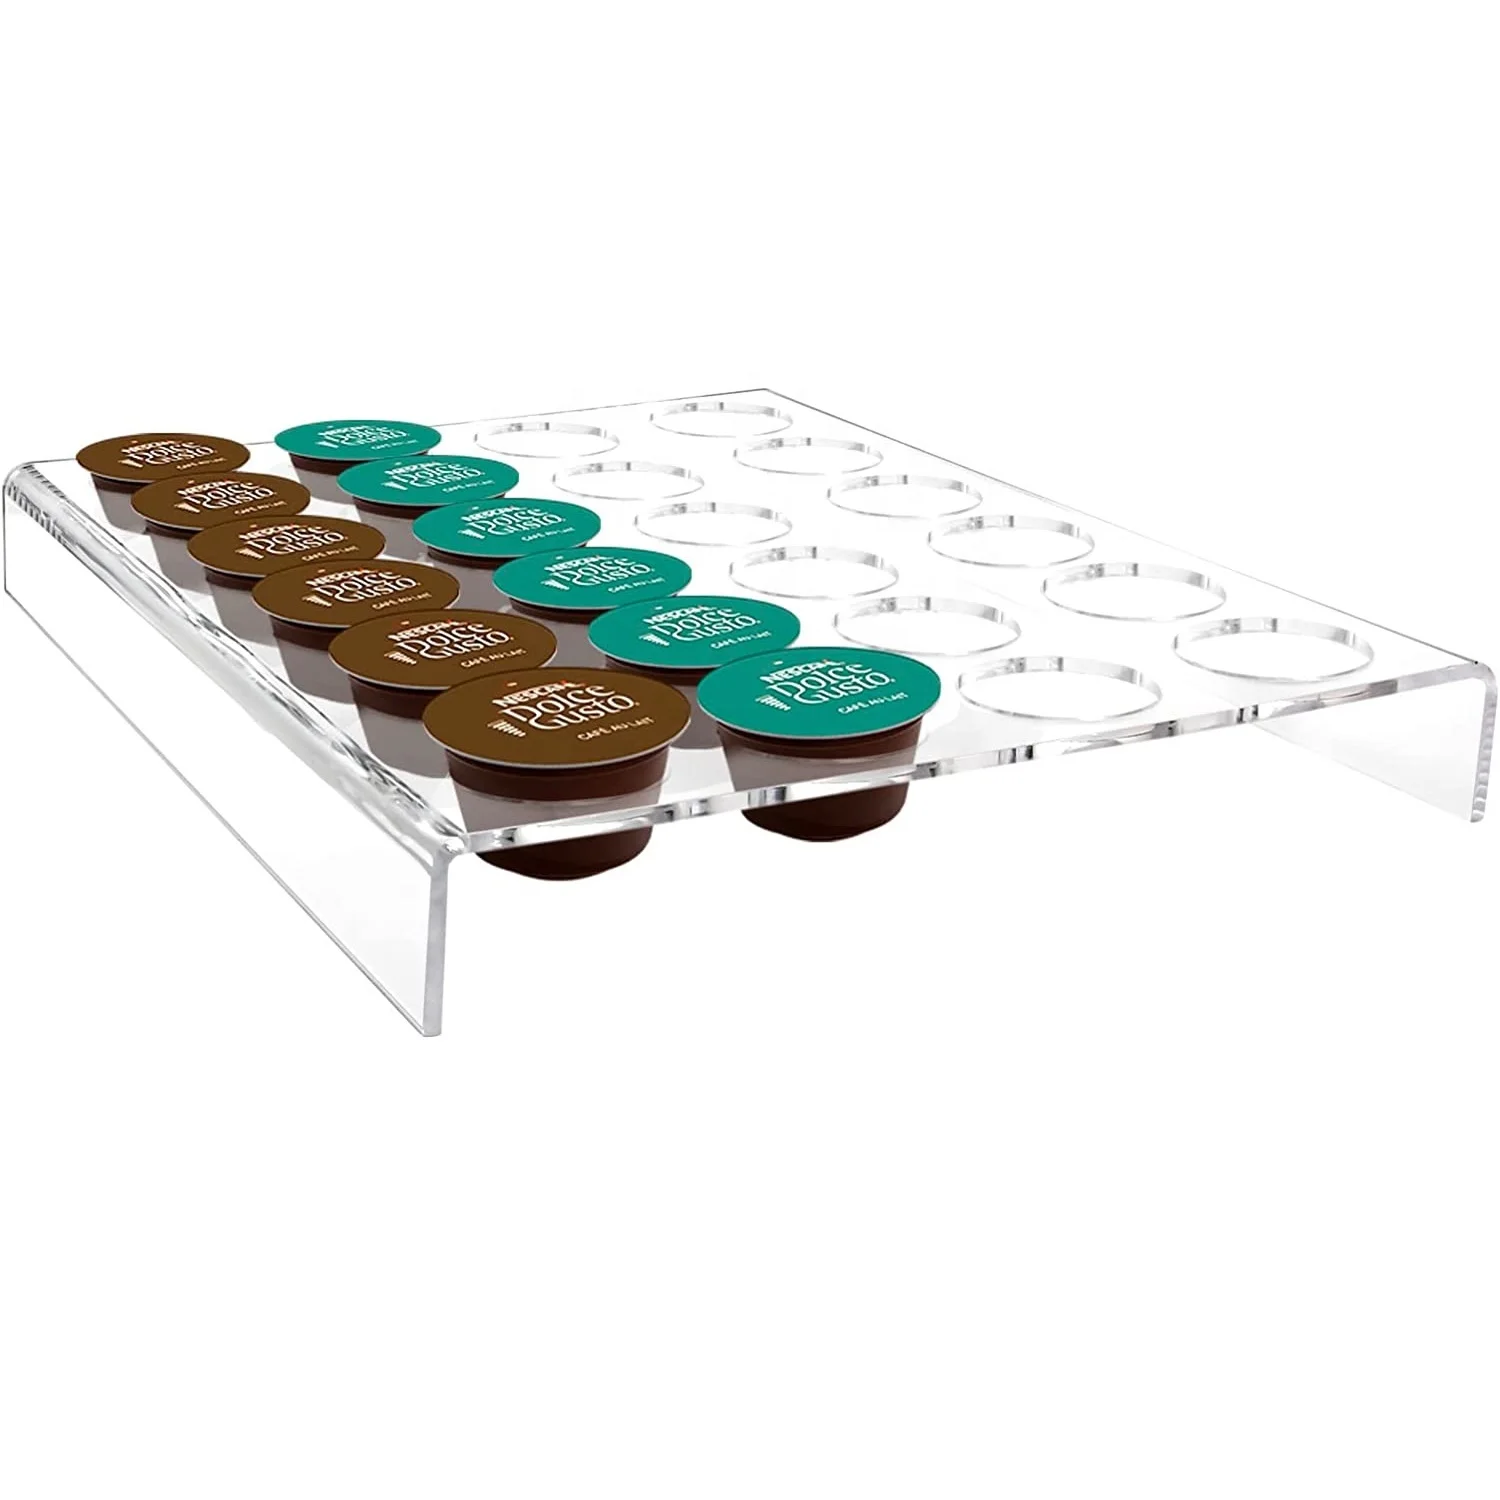 

Clear Acrylic Coffee Pod Holder Storage Tray for Capsule Drawer Insert Organizer Holds 24 Pods Drawer of Kitchen Home Office